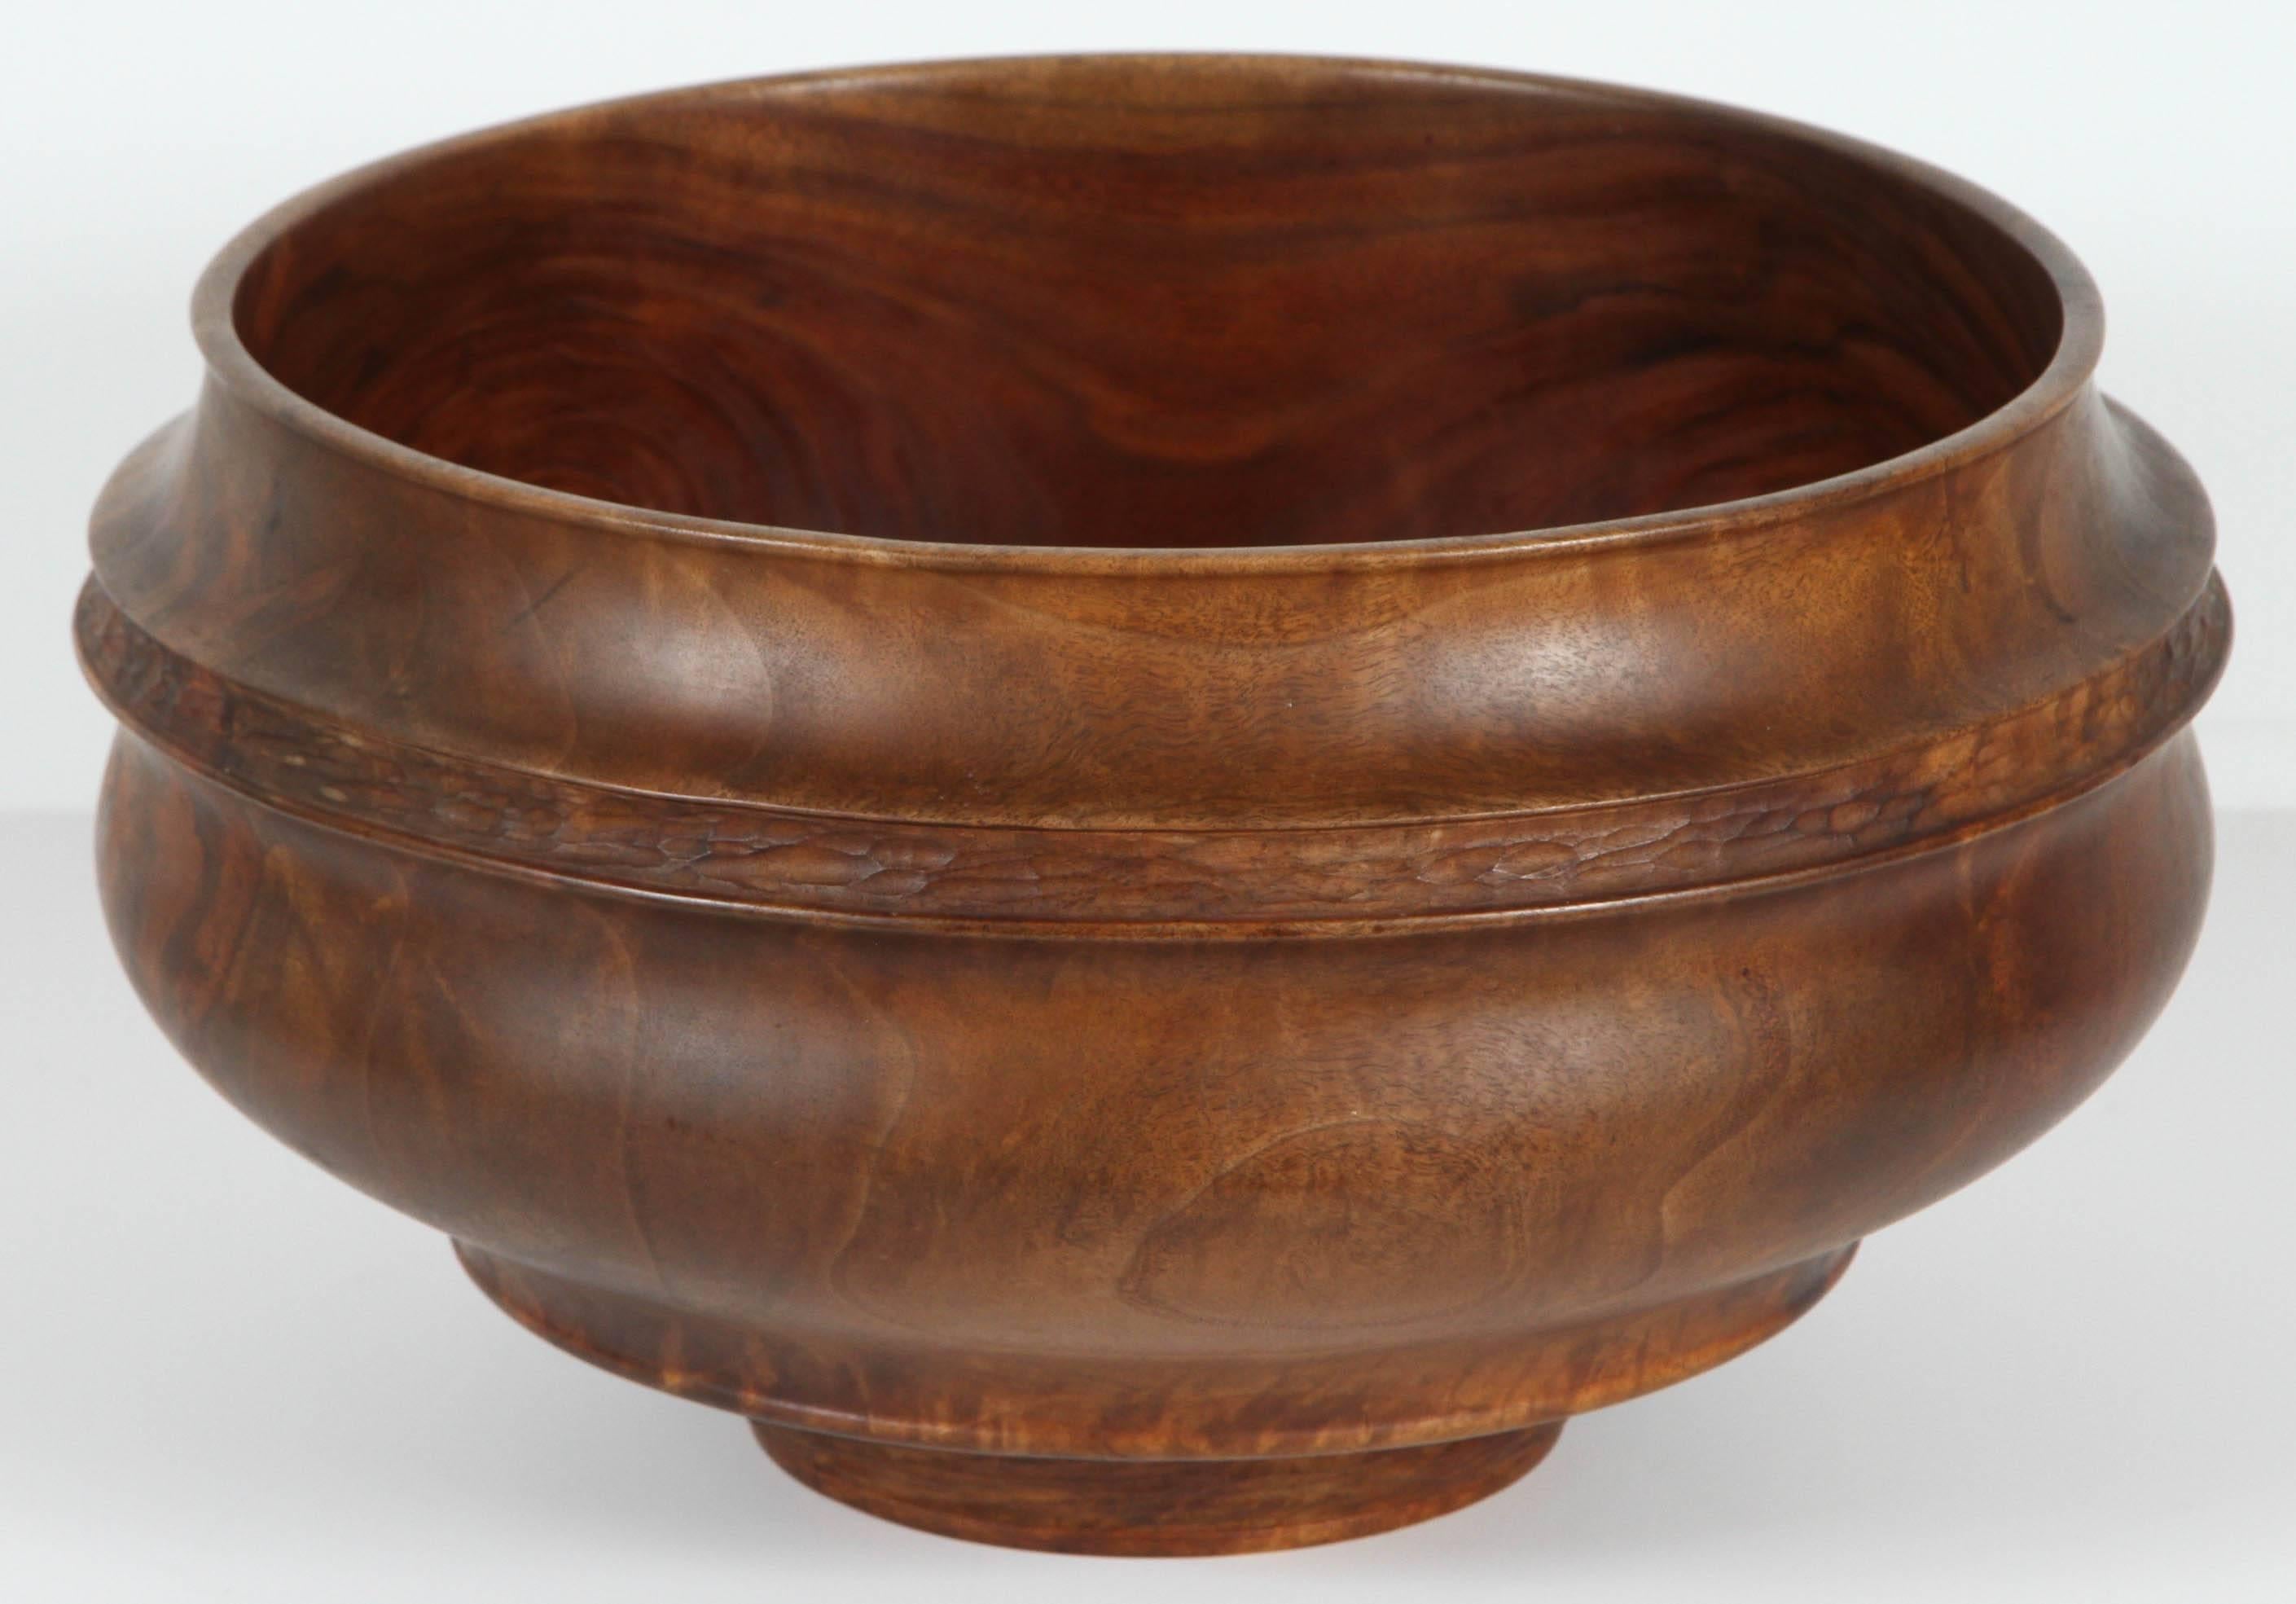 Great early Donald Saxby chip-carved black walnut bowl. Beautiful chatter texture around the collar and base (see detail images.) This example is featured on the cover of the catalog titled 